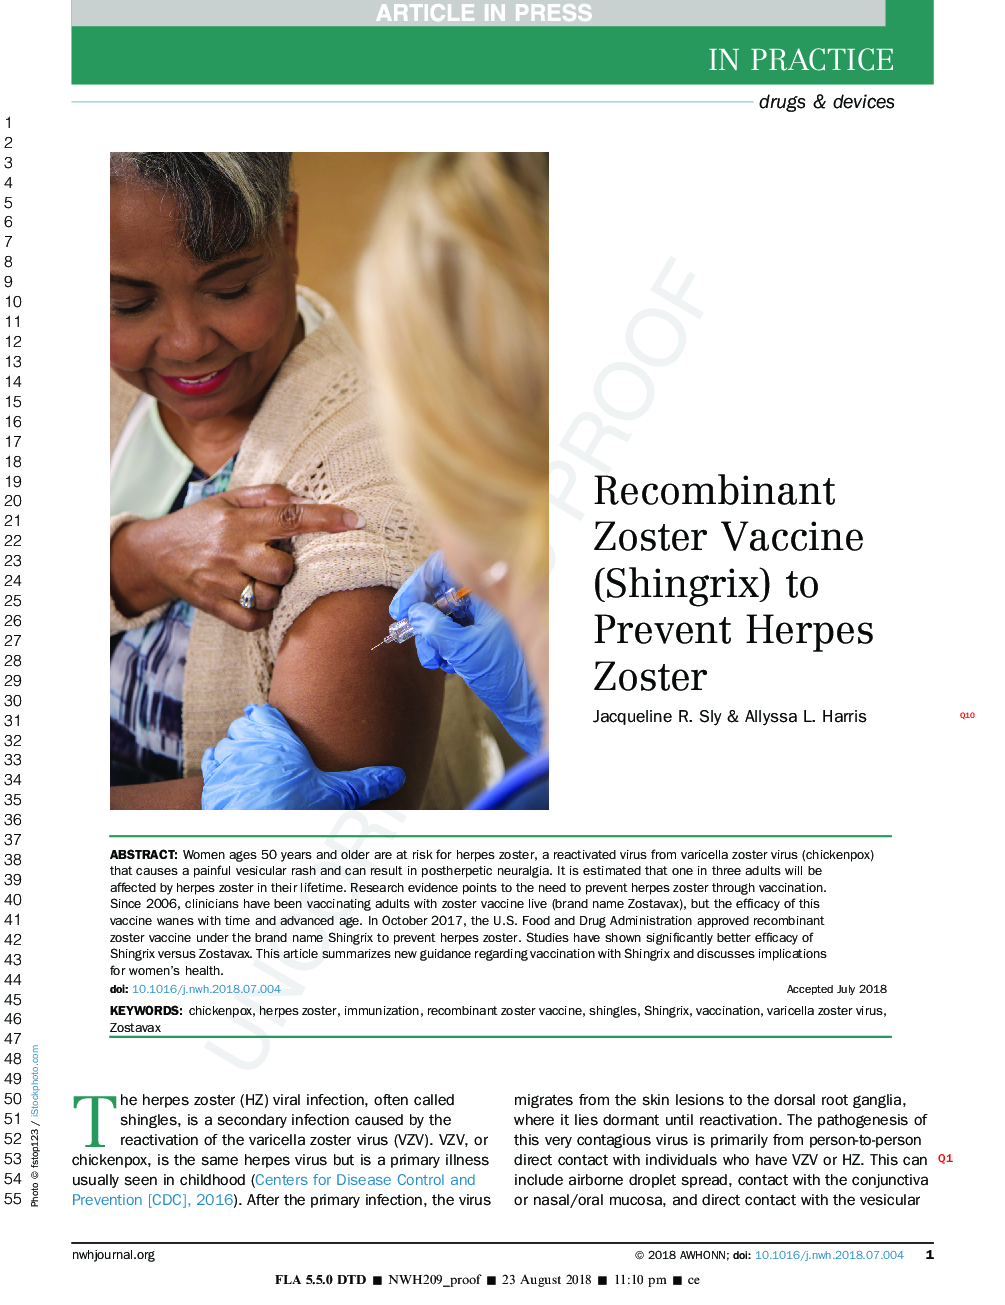 Recombinant Zoster Vaccine (Shingrix) to Prevent Herpes Zoster